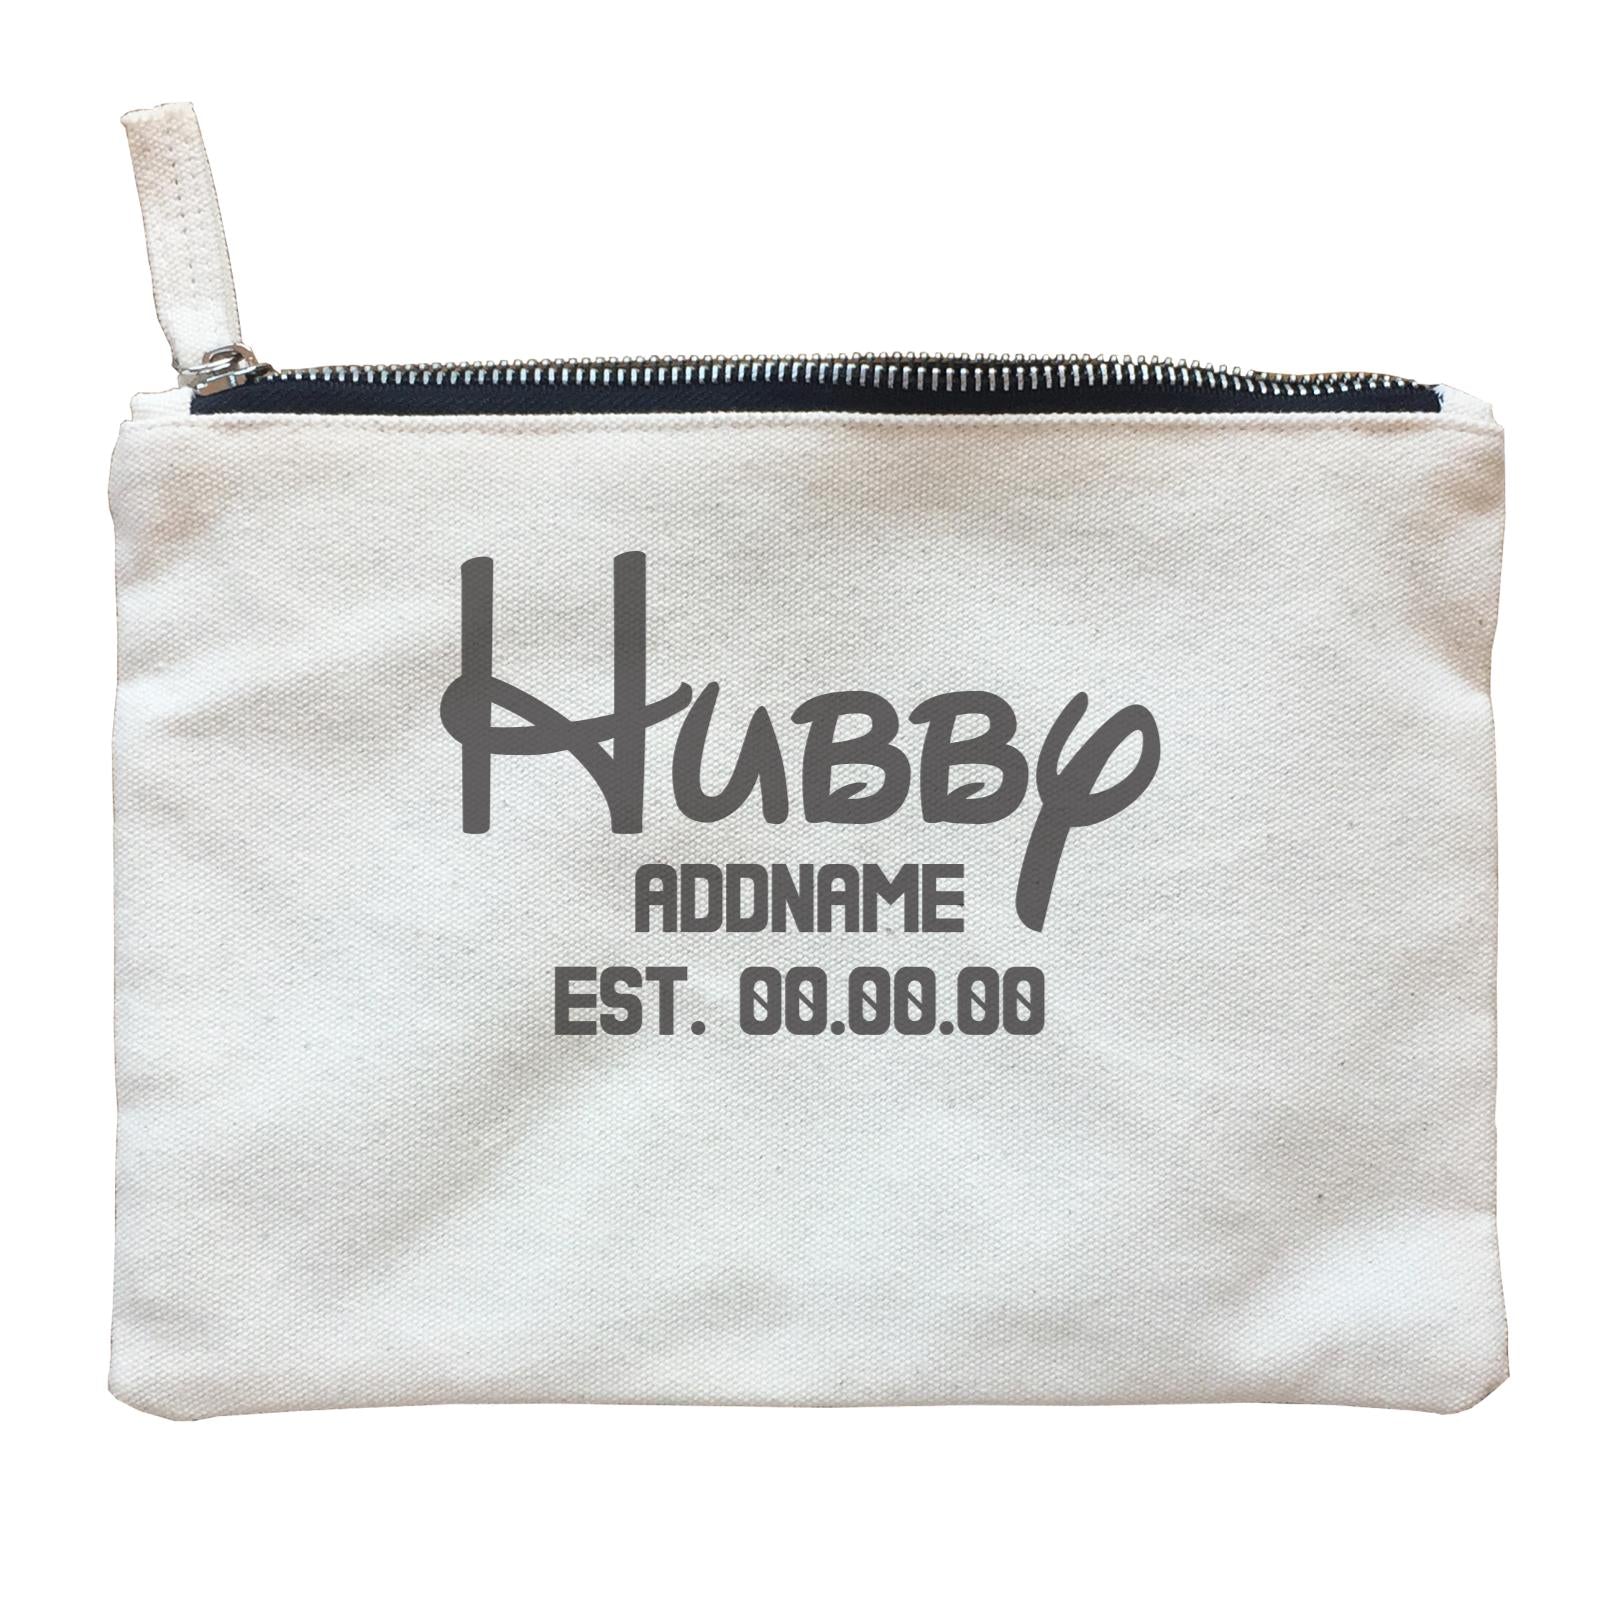 Husband and Wife Hubby Addname With Date Zipper Pouch